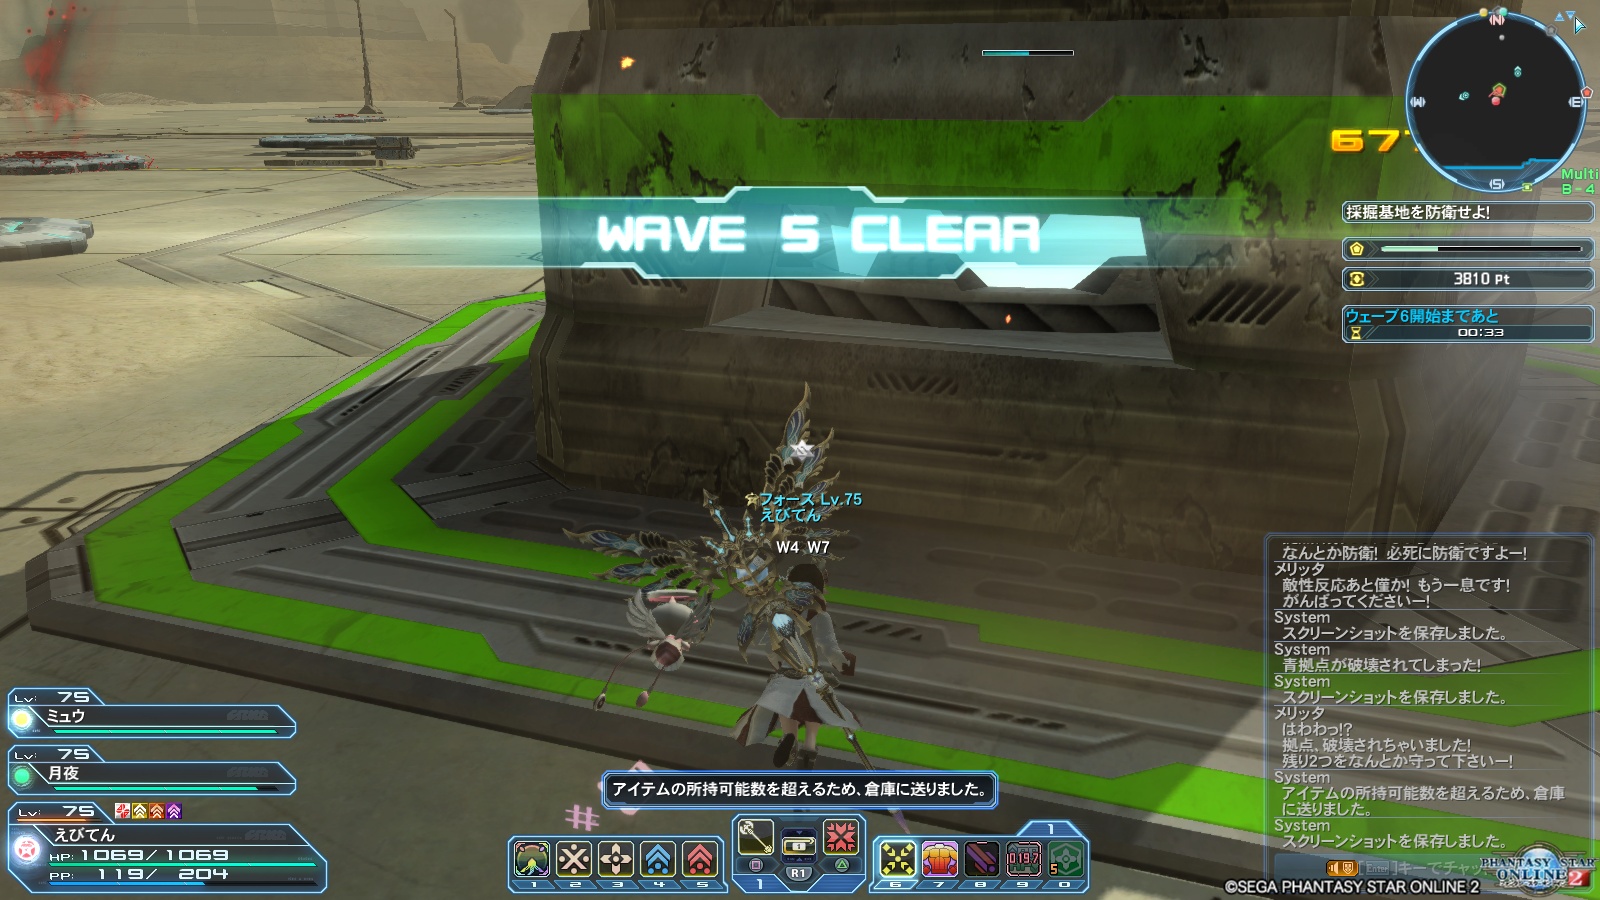 WAVE 5 CLEAR